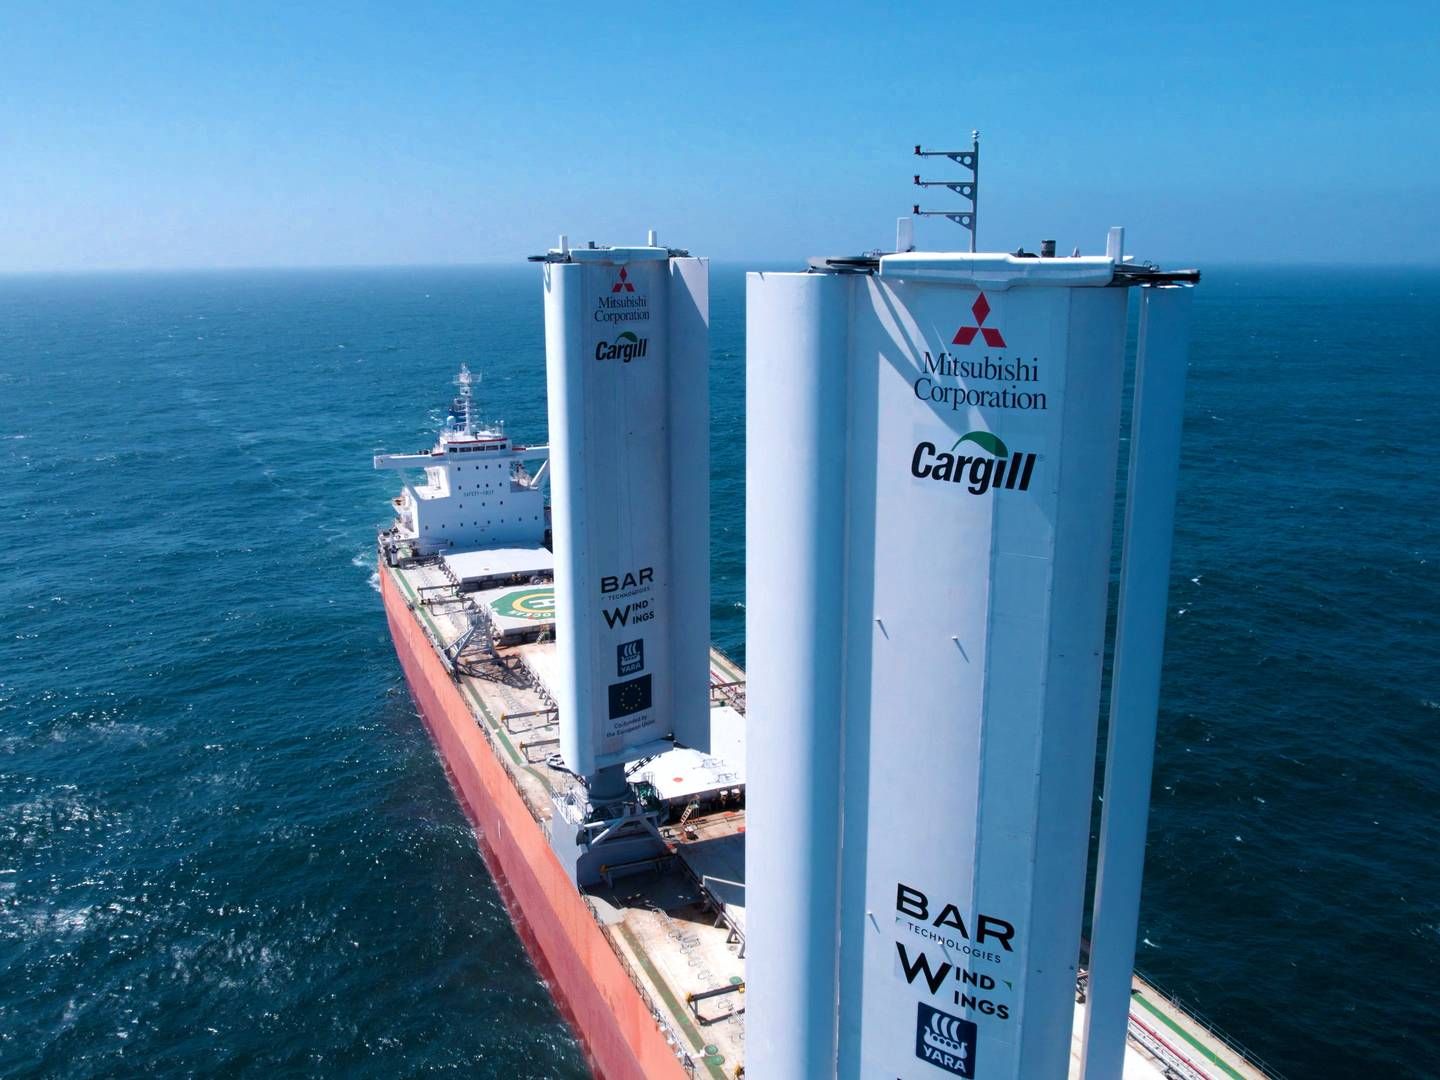 In August, Cargill International tested a new wind-powered ship. Now, in a joint development project with Lloyds Register and others, the commodities company is launching a new kamsarmax dry cargo ship that can run on methanol and wind power. | Foto: Cargill Bulgaria/Reuters/Ritzau Scanpix